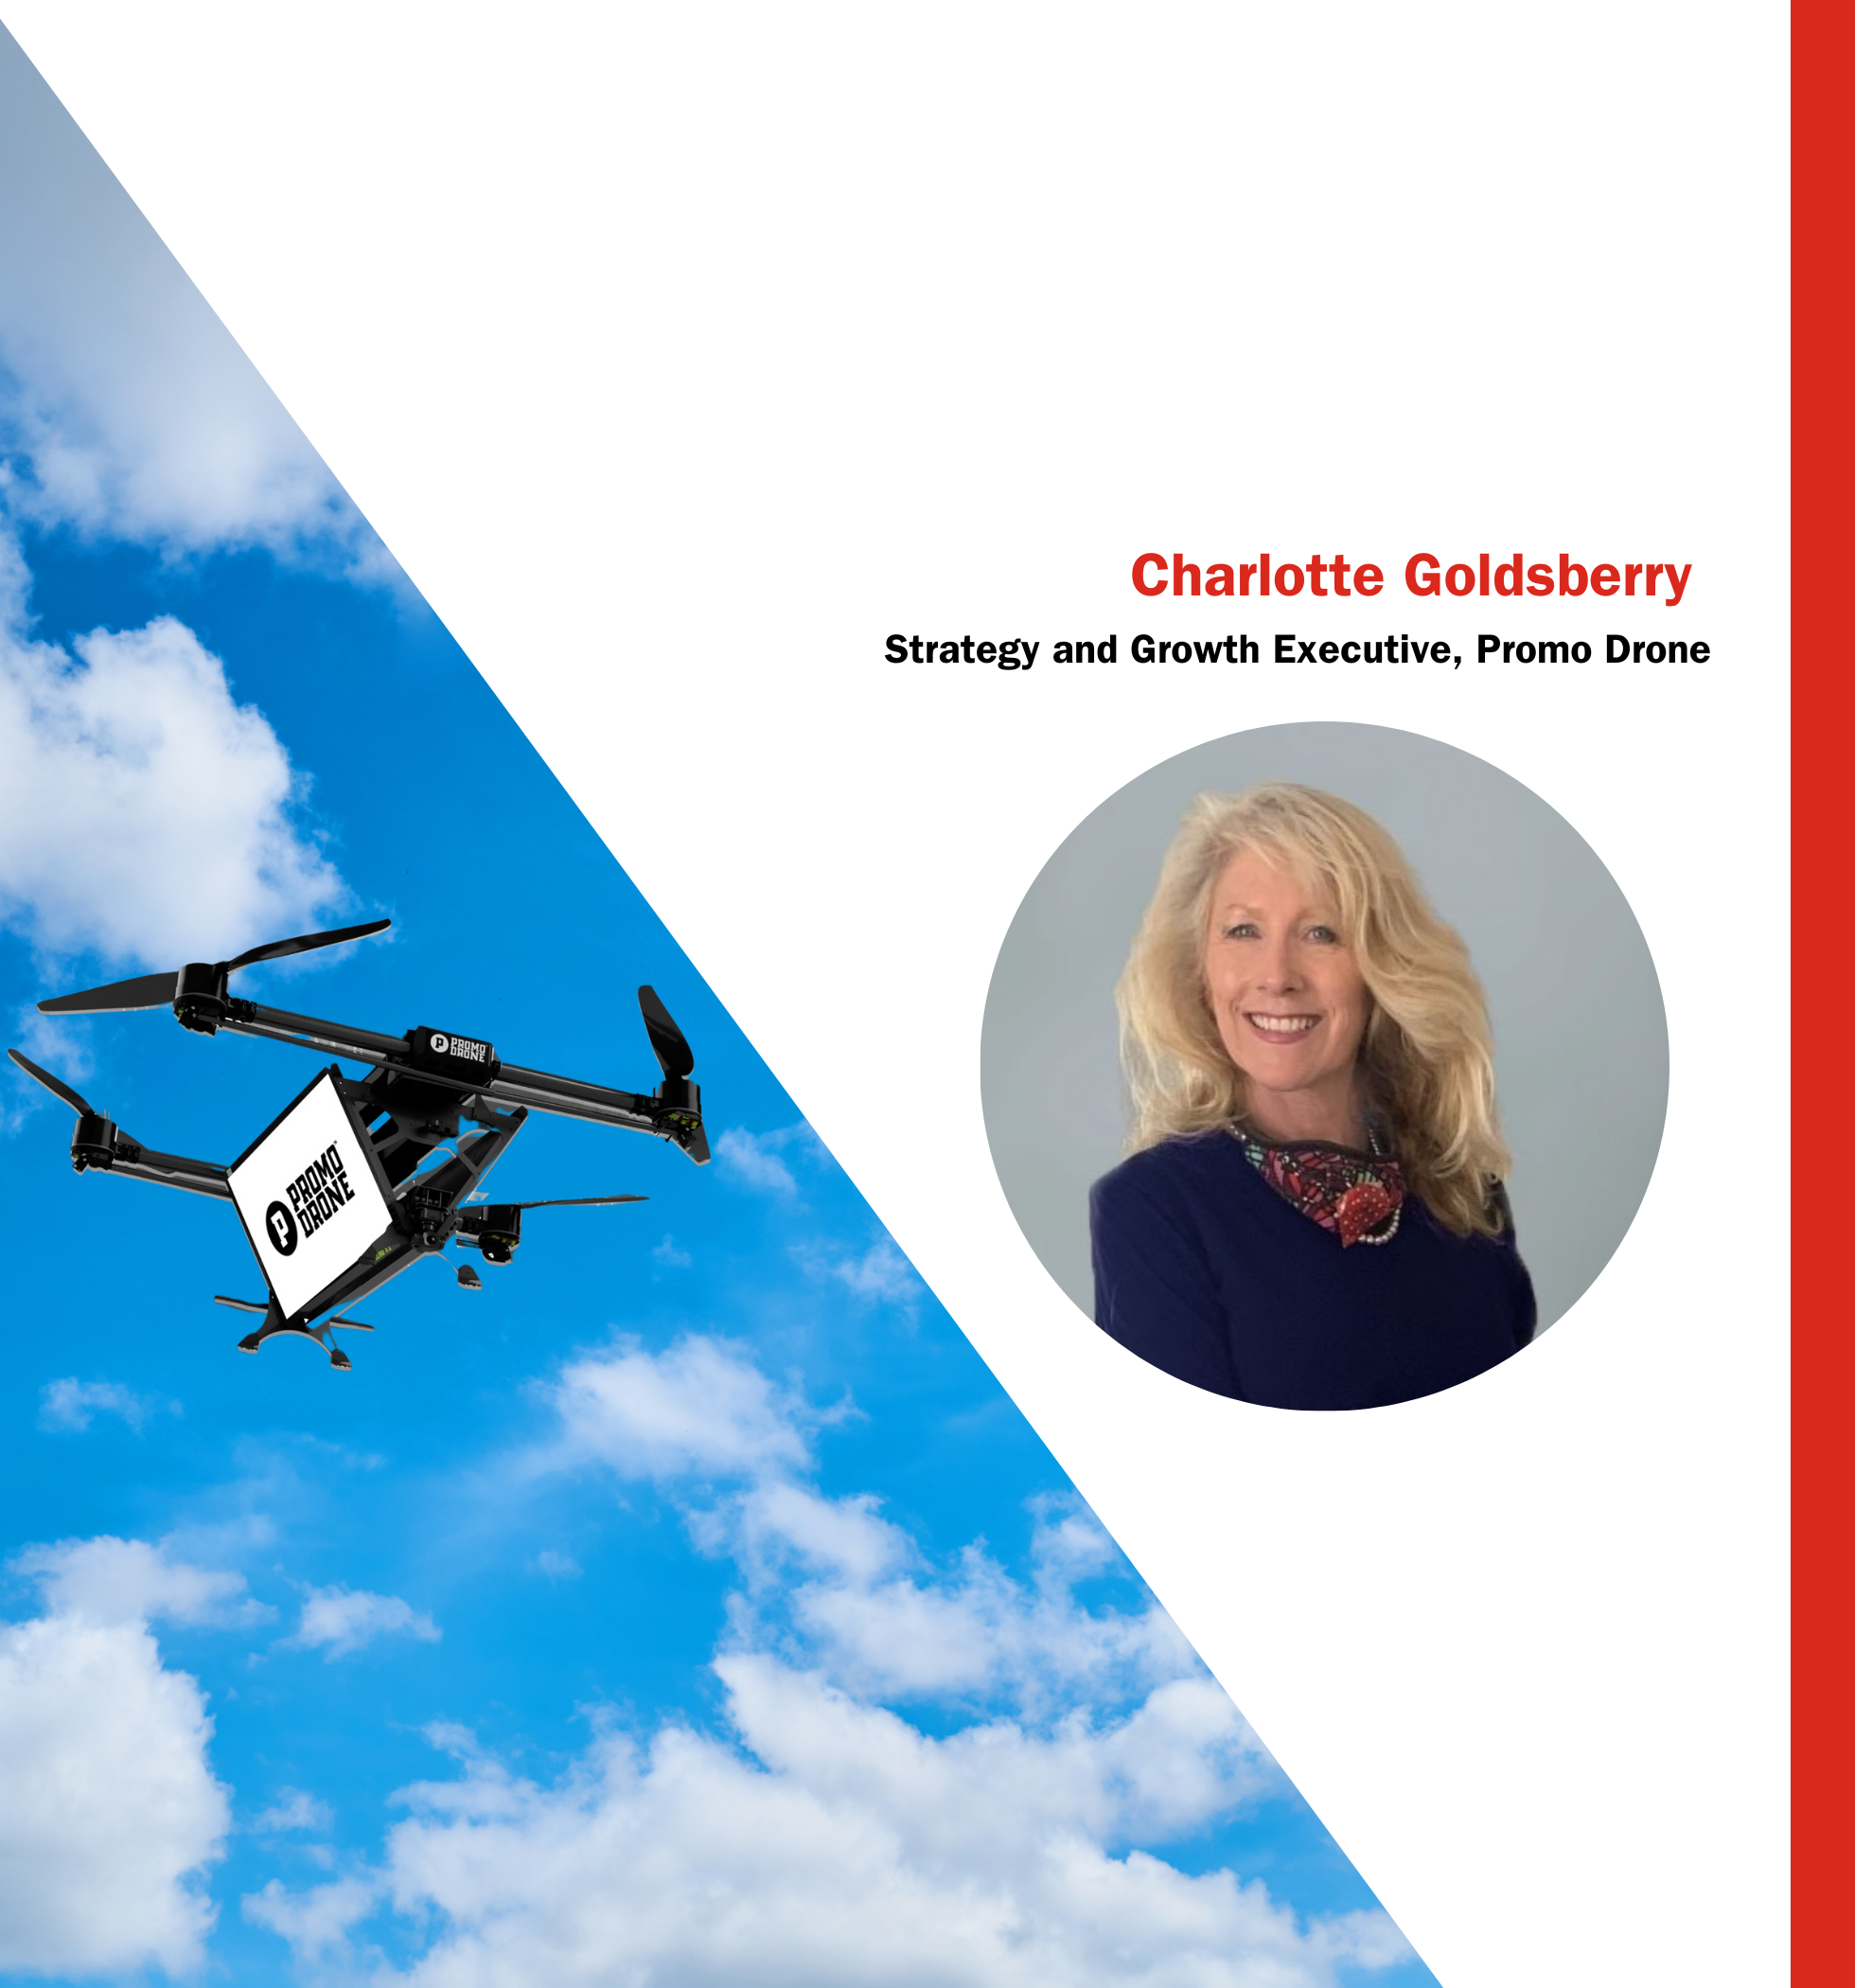 Across The Desk with Promo Drone’s Charlotte Goldsberry